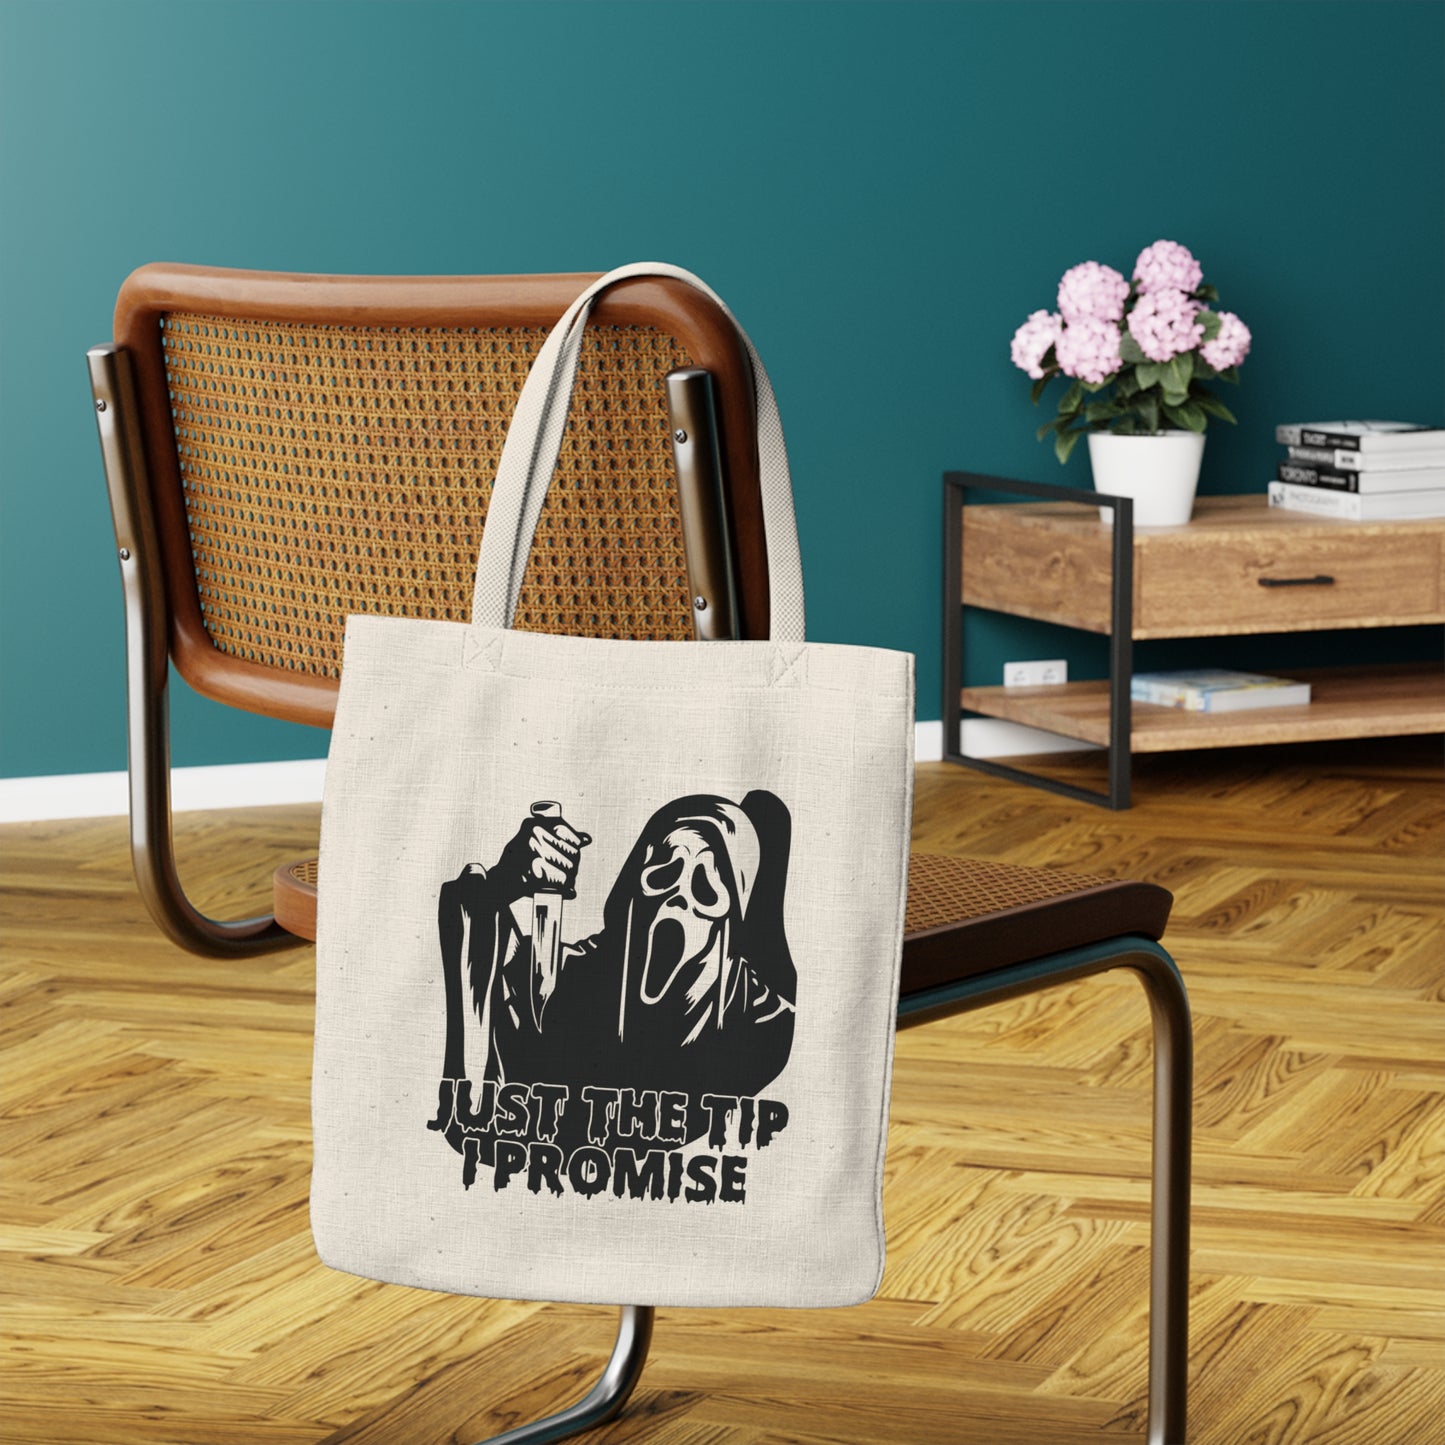 Just The Tip, I Promise - Everyday Tote Bag